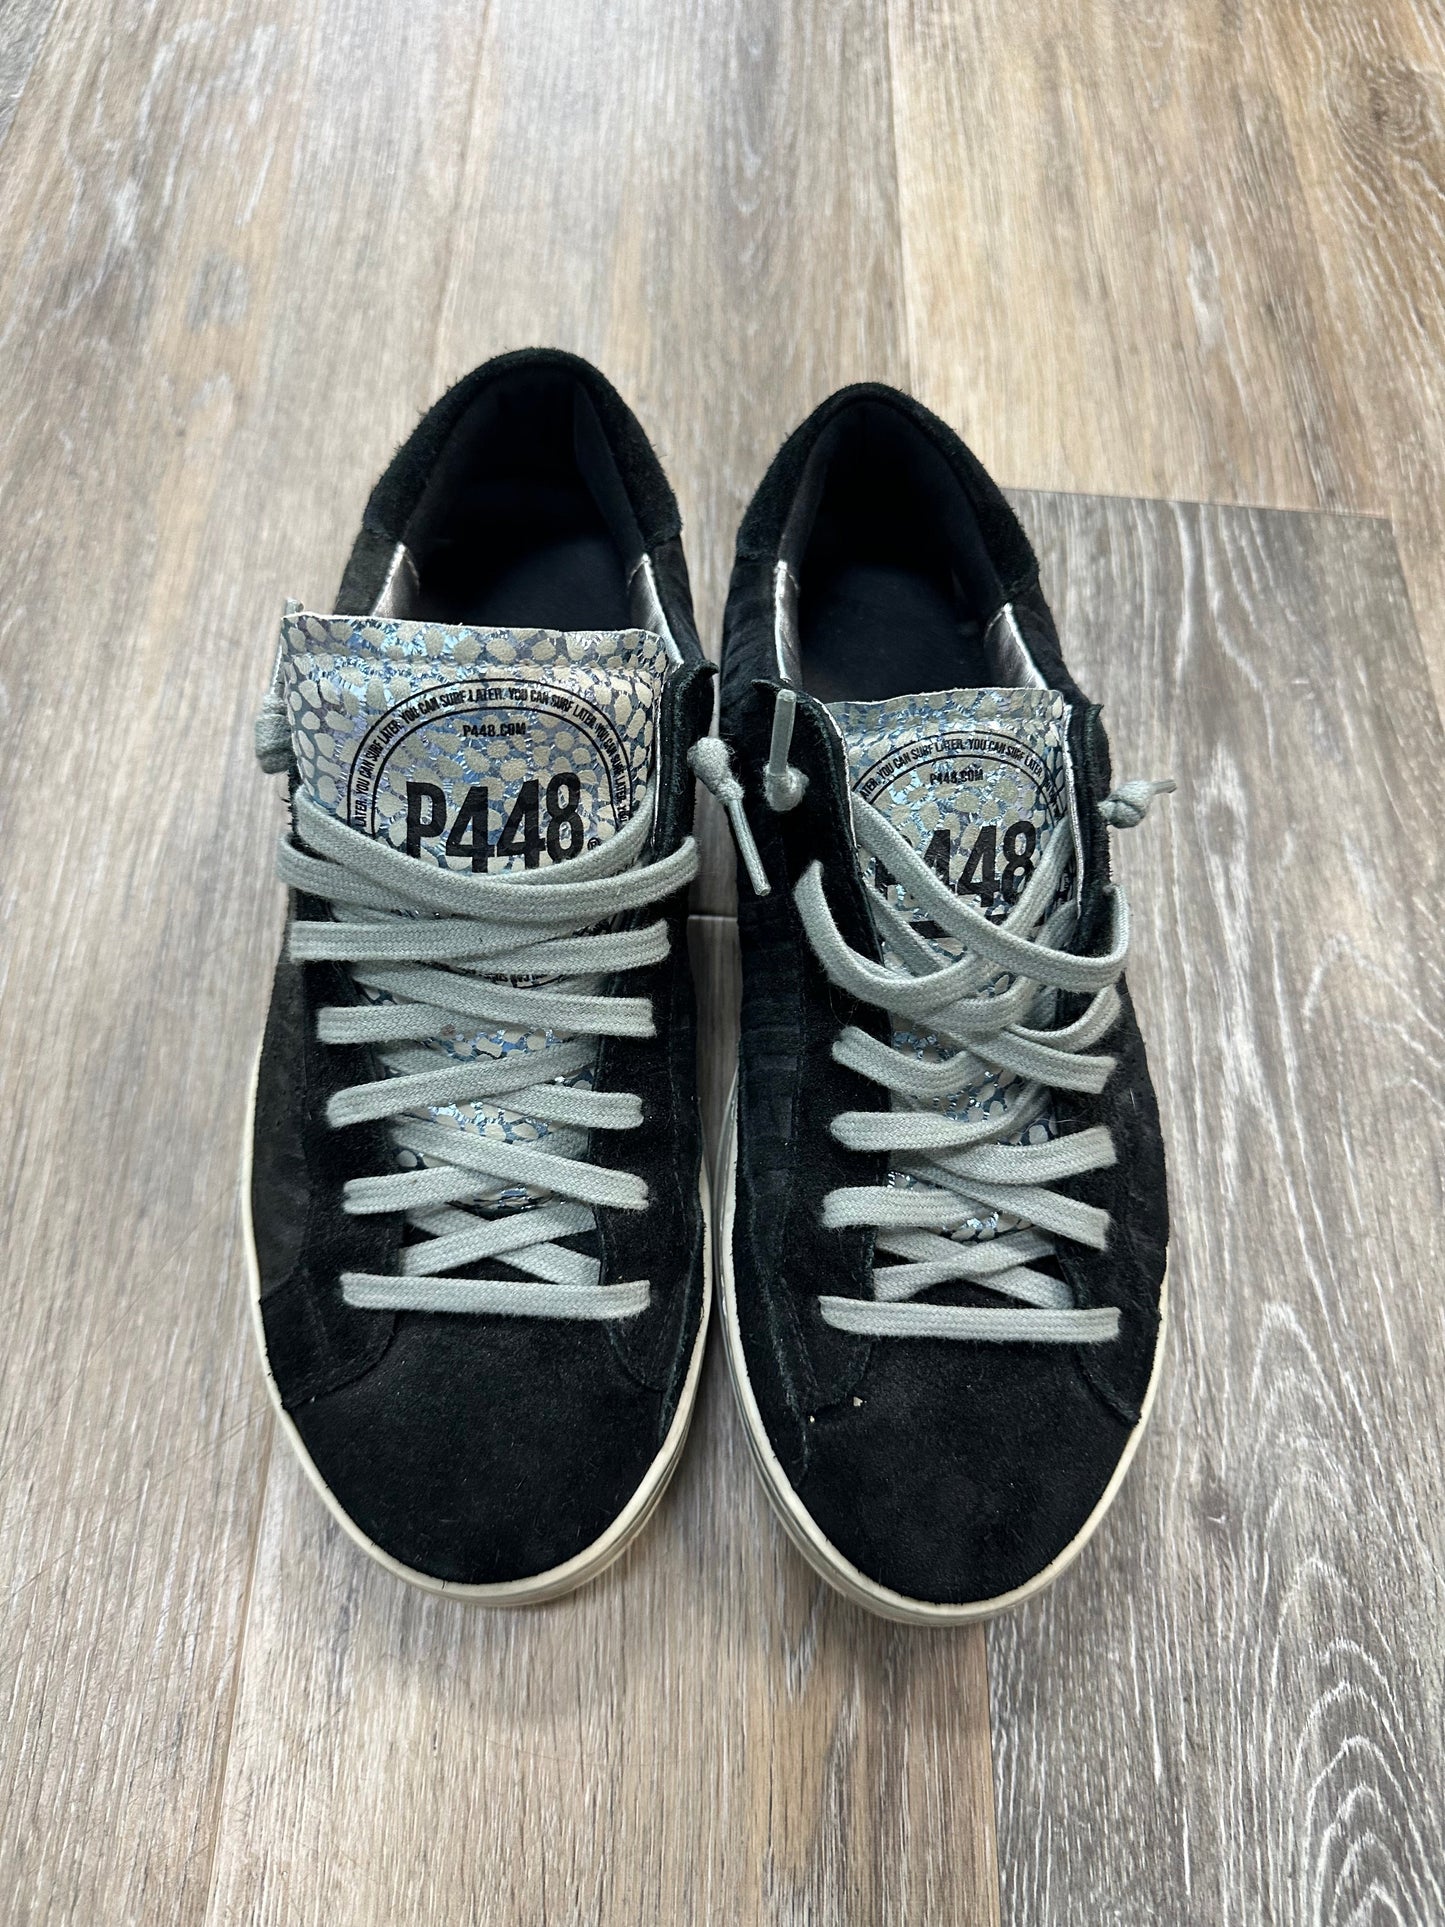 Black Shoes Sneakers P448, Size 9